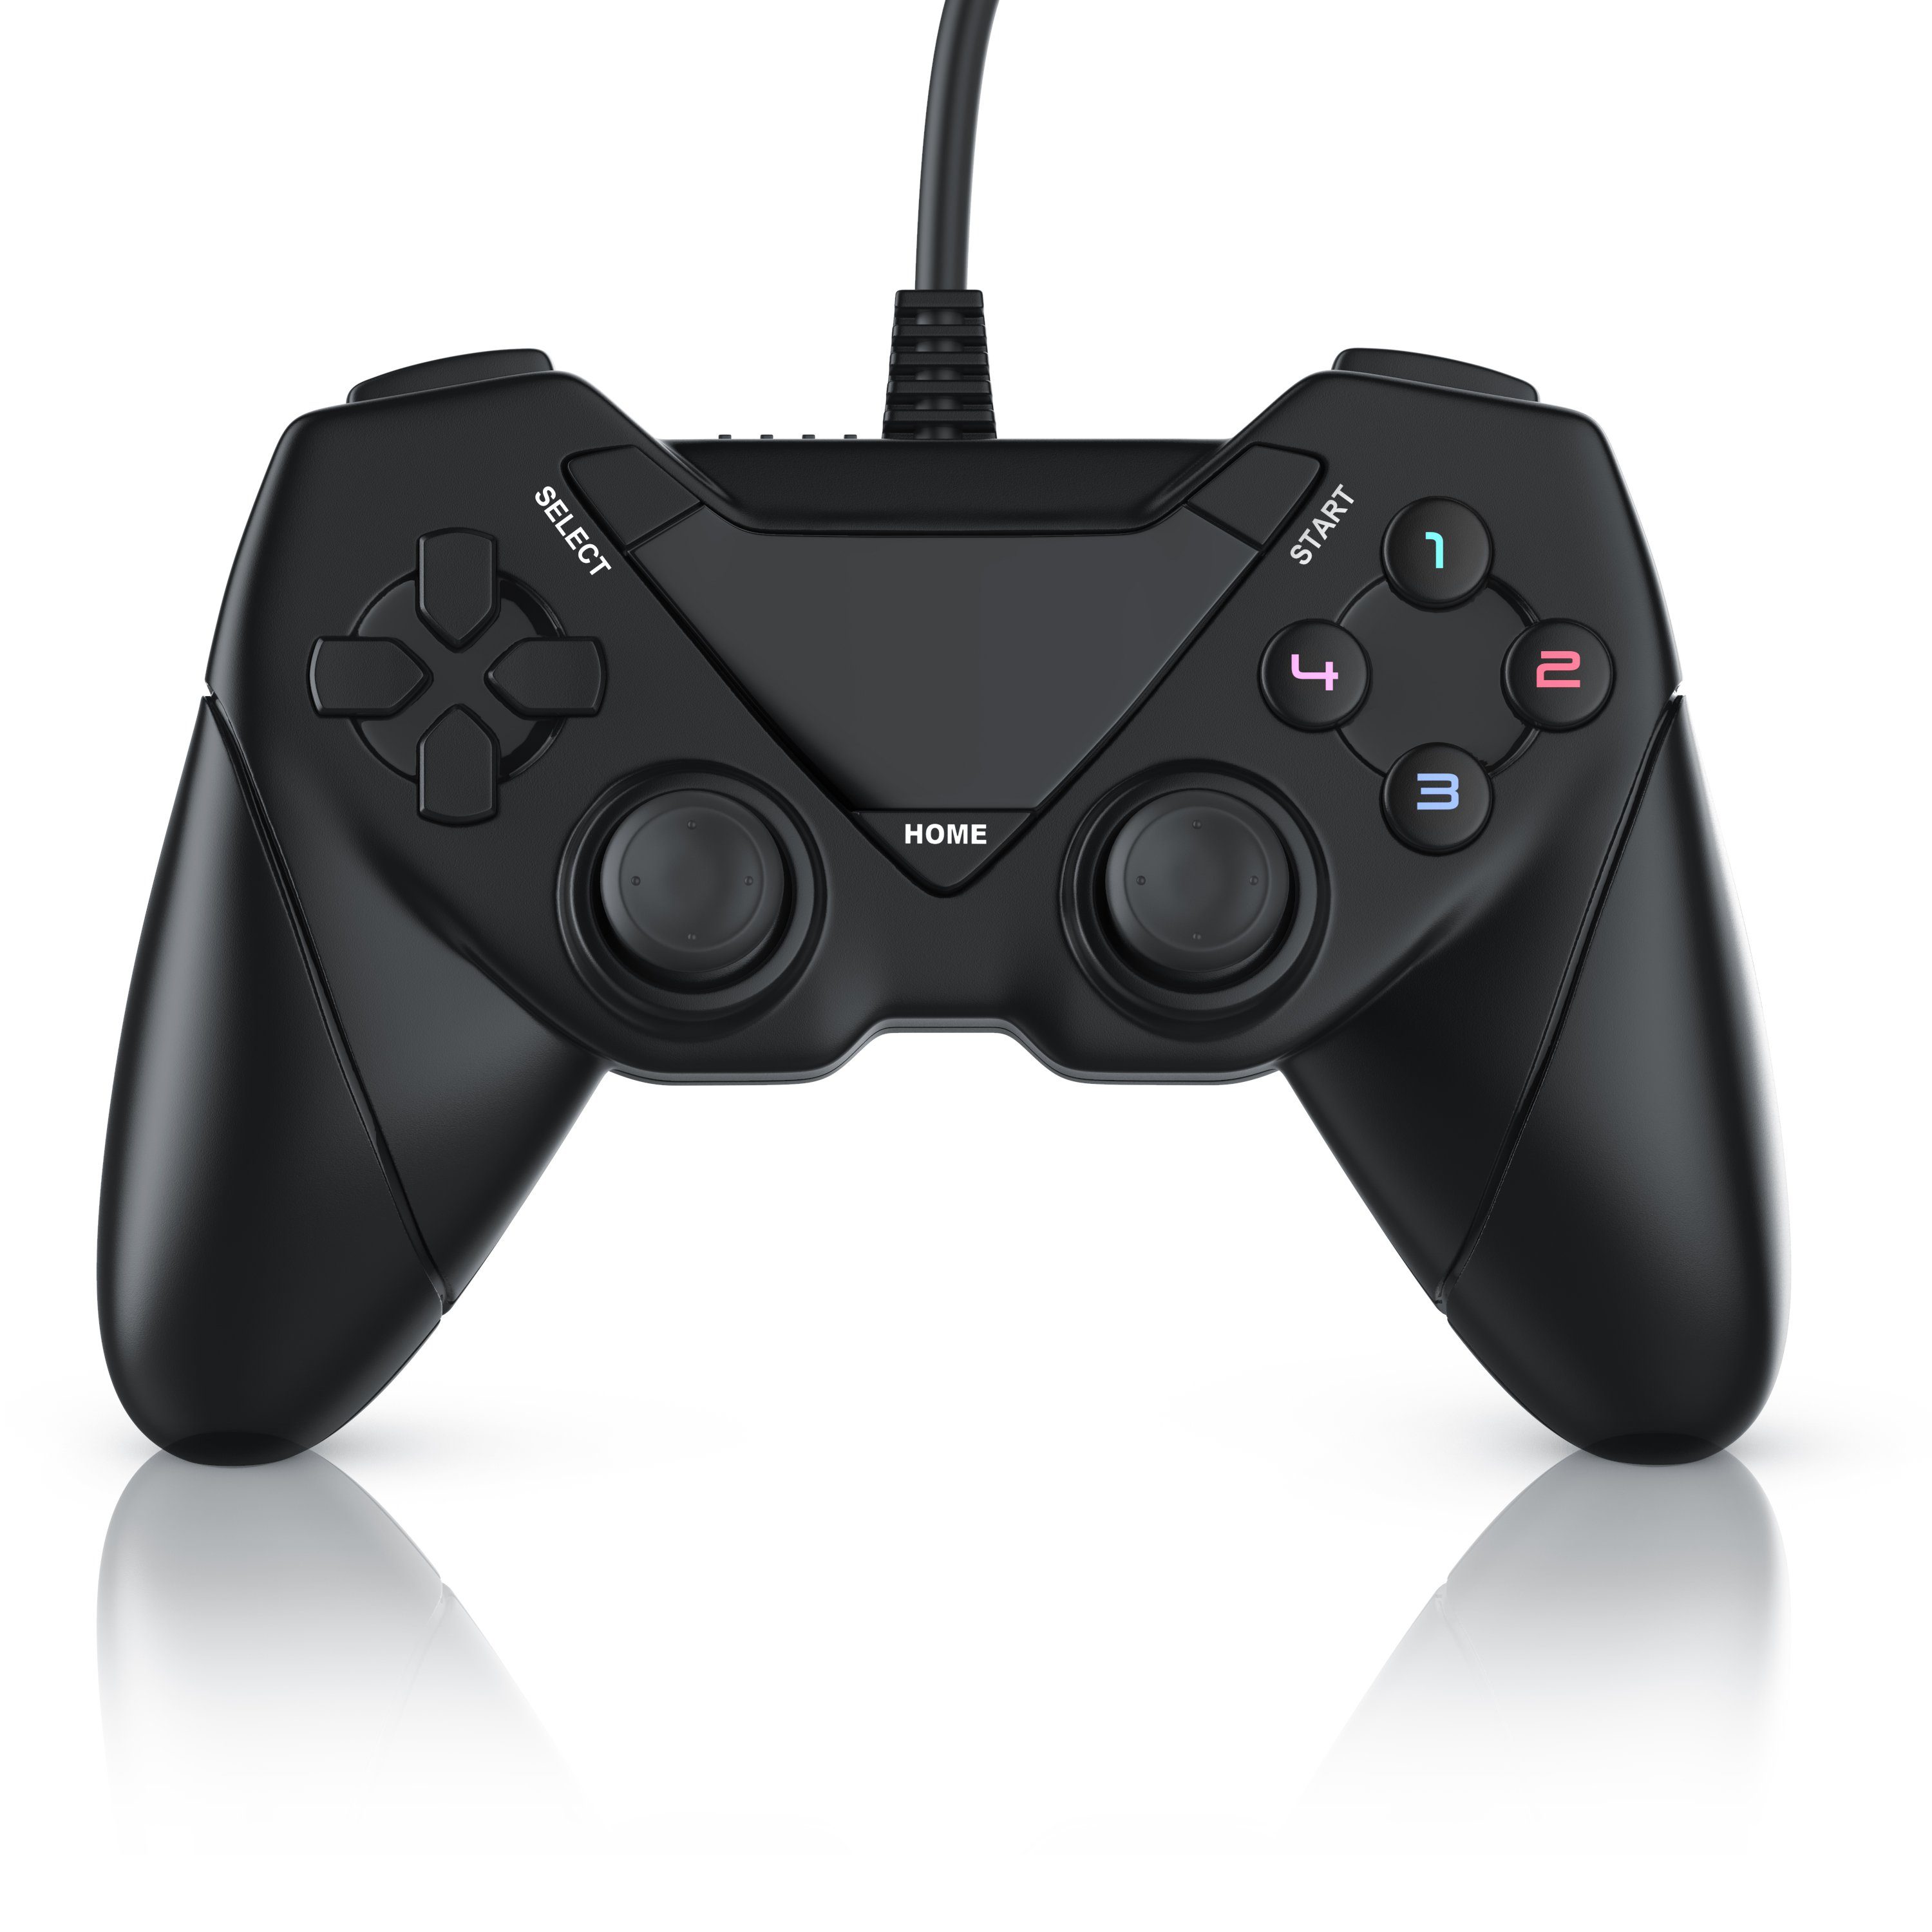 PlayStation-Controller X-Input) für PC St., Direct-Input / USB PS3 / Android, CSL / Controller (1